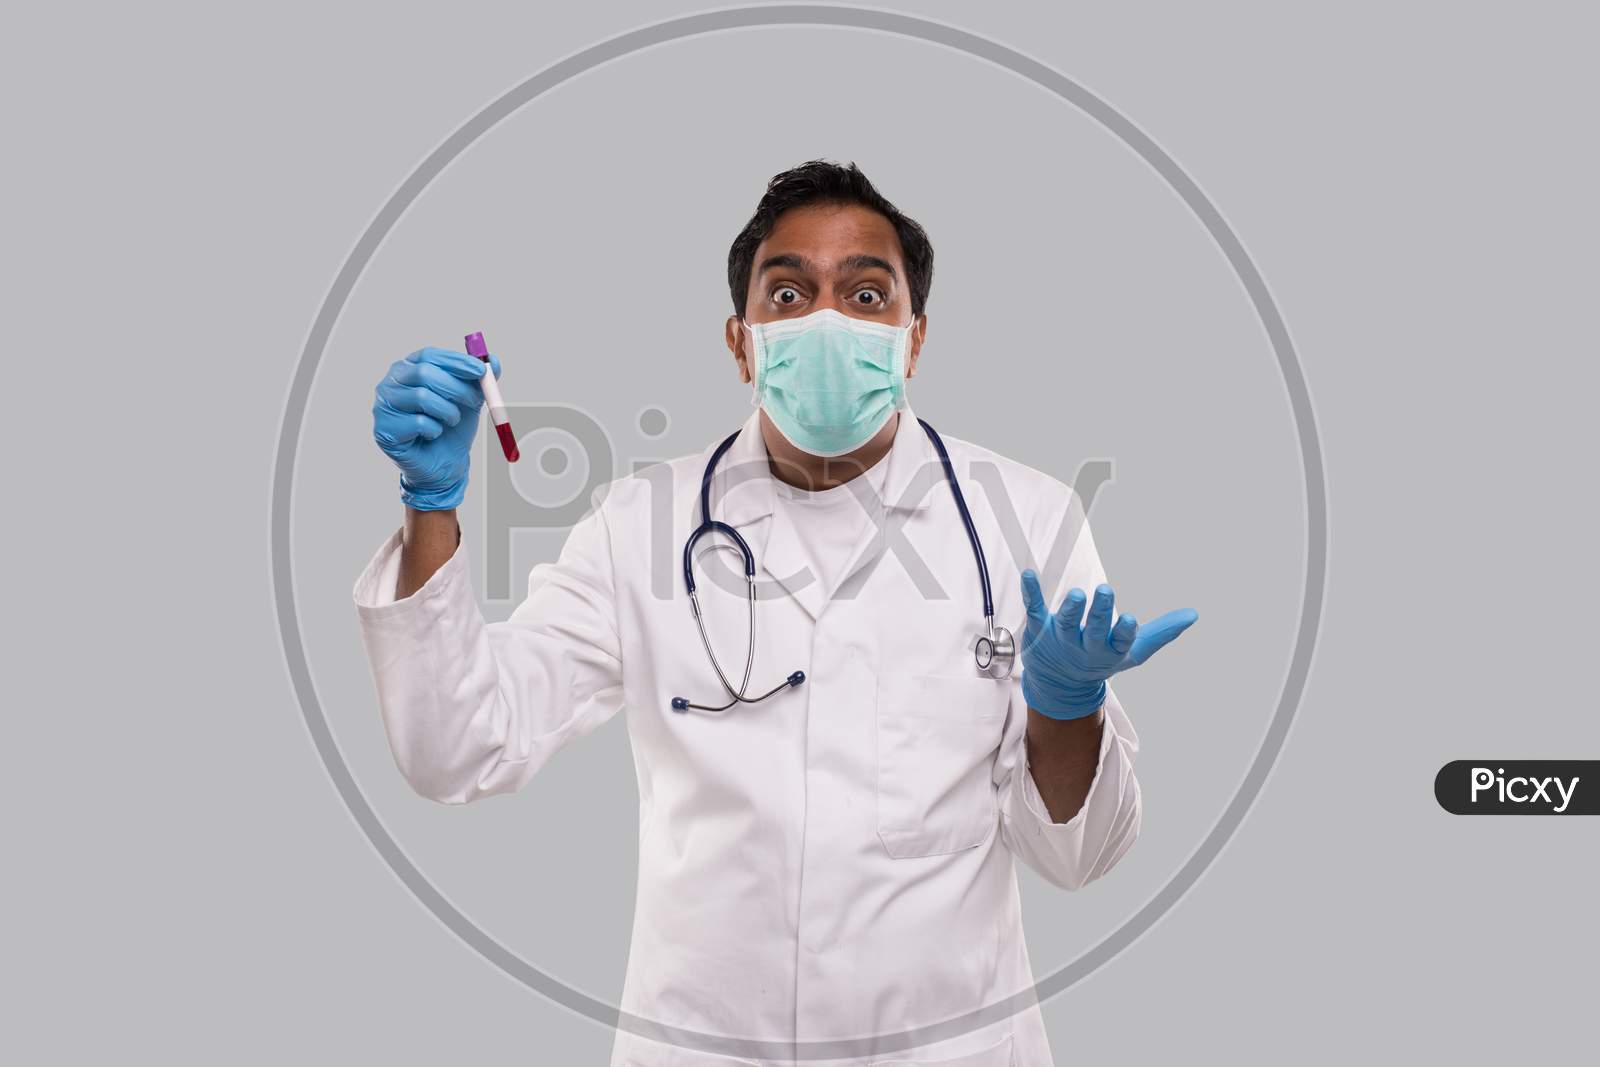 Doctor Surprised Holding Blood Tube Analysis Wearing Medical Mask And Gloves. Indian Man Doctor Science, Medical Concept. Isolated.